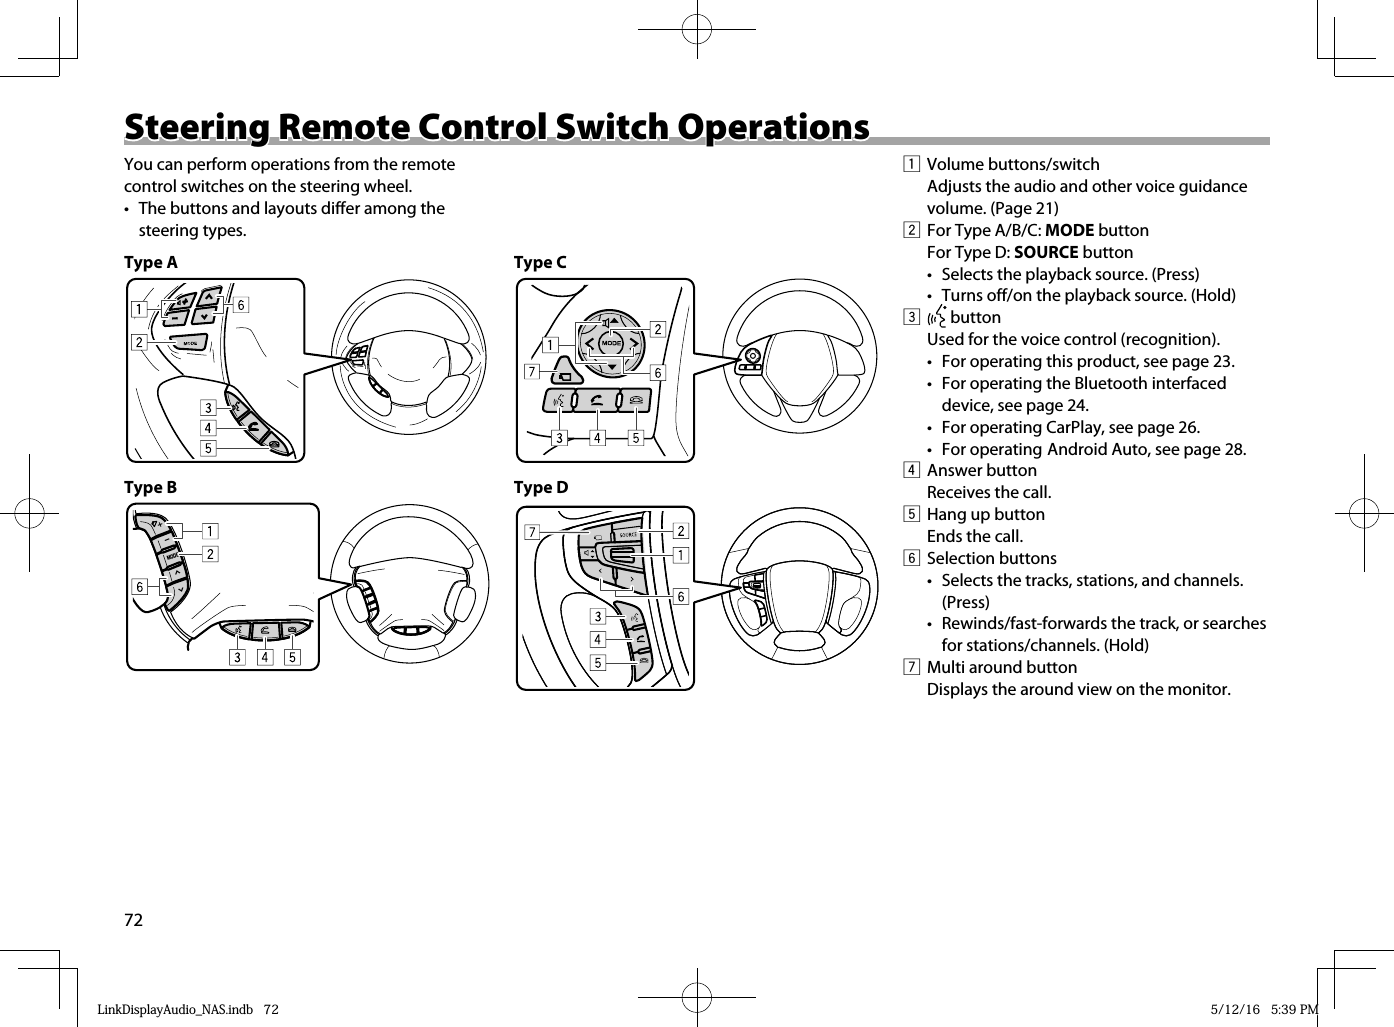 72 Steering Remote Control Switch Operations Steering Remote Control Switch OperationsYou can perform operations from the remote control switches on the steering wheel.•  The buttons and layouts differ among the steering types.Type A  Type B  ∧MODE+−∧Type C  Type D    1 Volume buttons/switch  Adjusts the audio and other voice guidance volume. (Page 21)2  For Type A/B/C: MODE buttonFor Type D: SOURCE button•  Selects the playback source. (Press)•  Turns off/on the playback source. (Hold)  3   buttonUsed for the voice control (recognition).•  For operating this product, see page 23.•  For operating the Bluetooth interfaced device, see page 24.•  For operating CarPlay, see page 26.• For operating Android Auto, see page 28.4 Answer button  Receives the call.5  Hang up button  Ends the call.6 Selection buttons•  Selects the tracks, stations, and channels. (Press)•  Rewinds/fast-forwards the track, or searches for stations/channels. (Hold)7  Multi around button  Displays the around view on the monitor.LinkDisplayAudio_NAS.indb   72LinkDisplayAudio_NAS.indb   72 5/12/16   5:39 PM5/12/16   5:39 PM